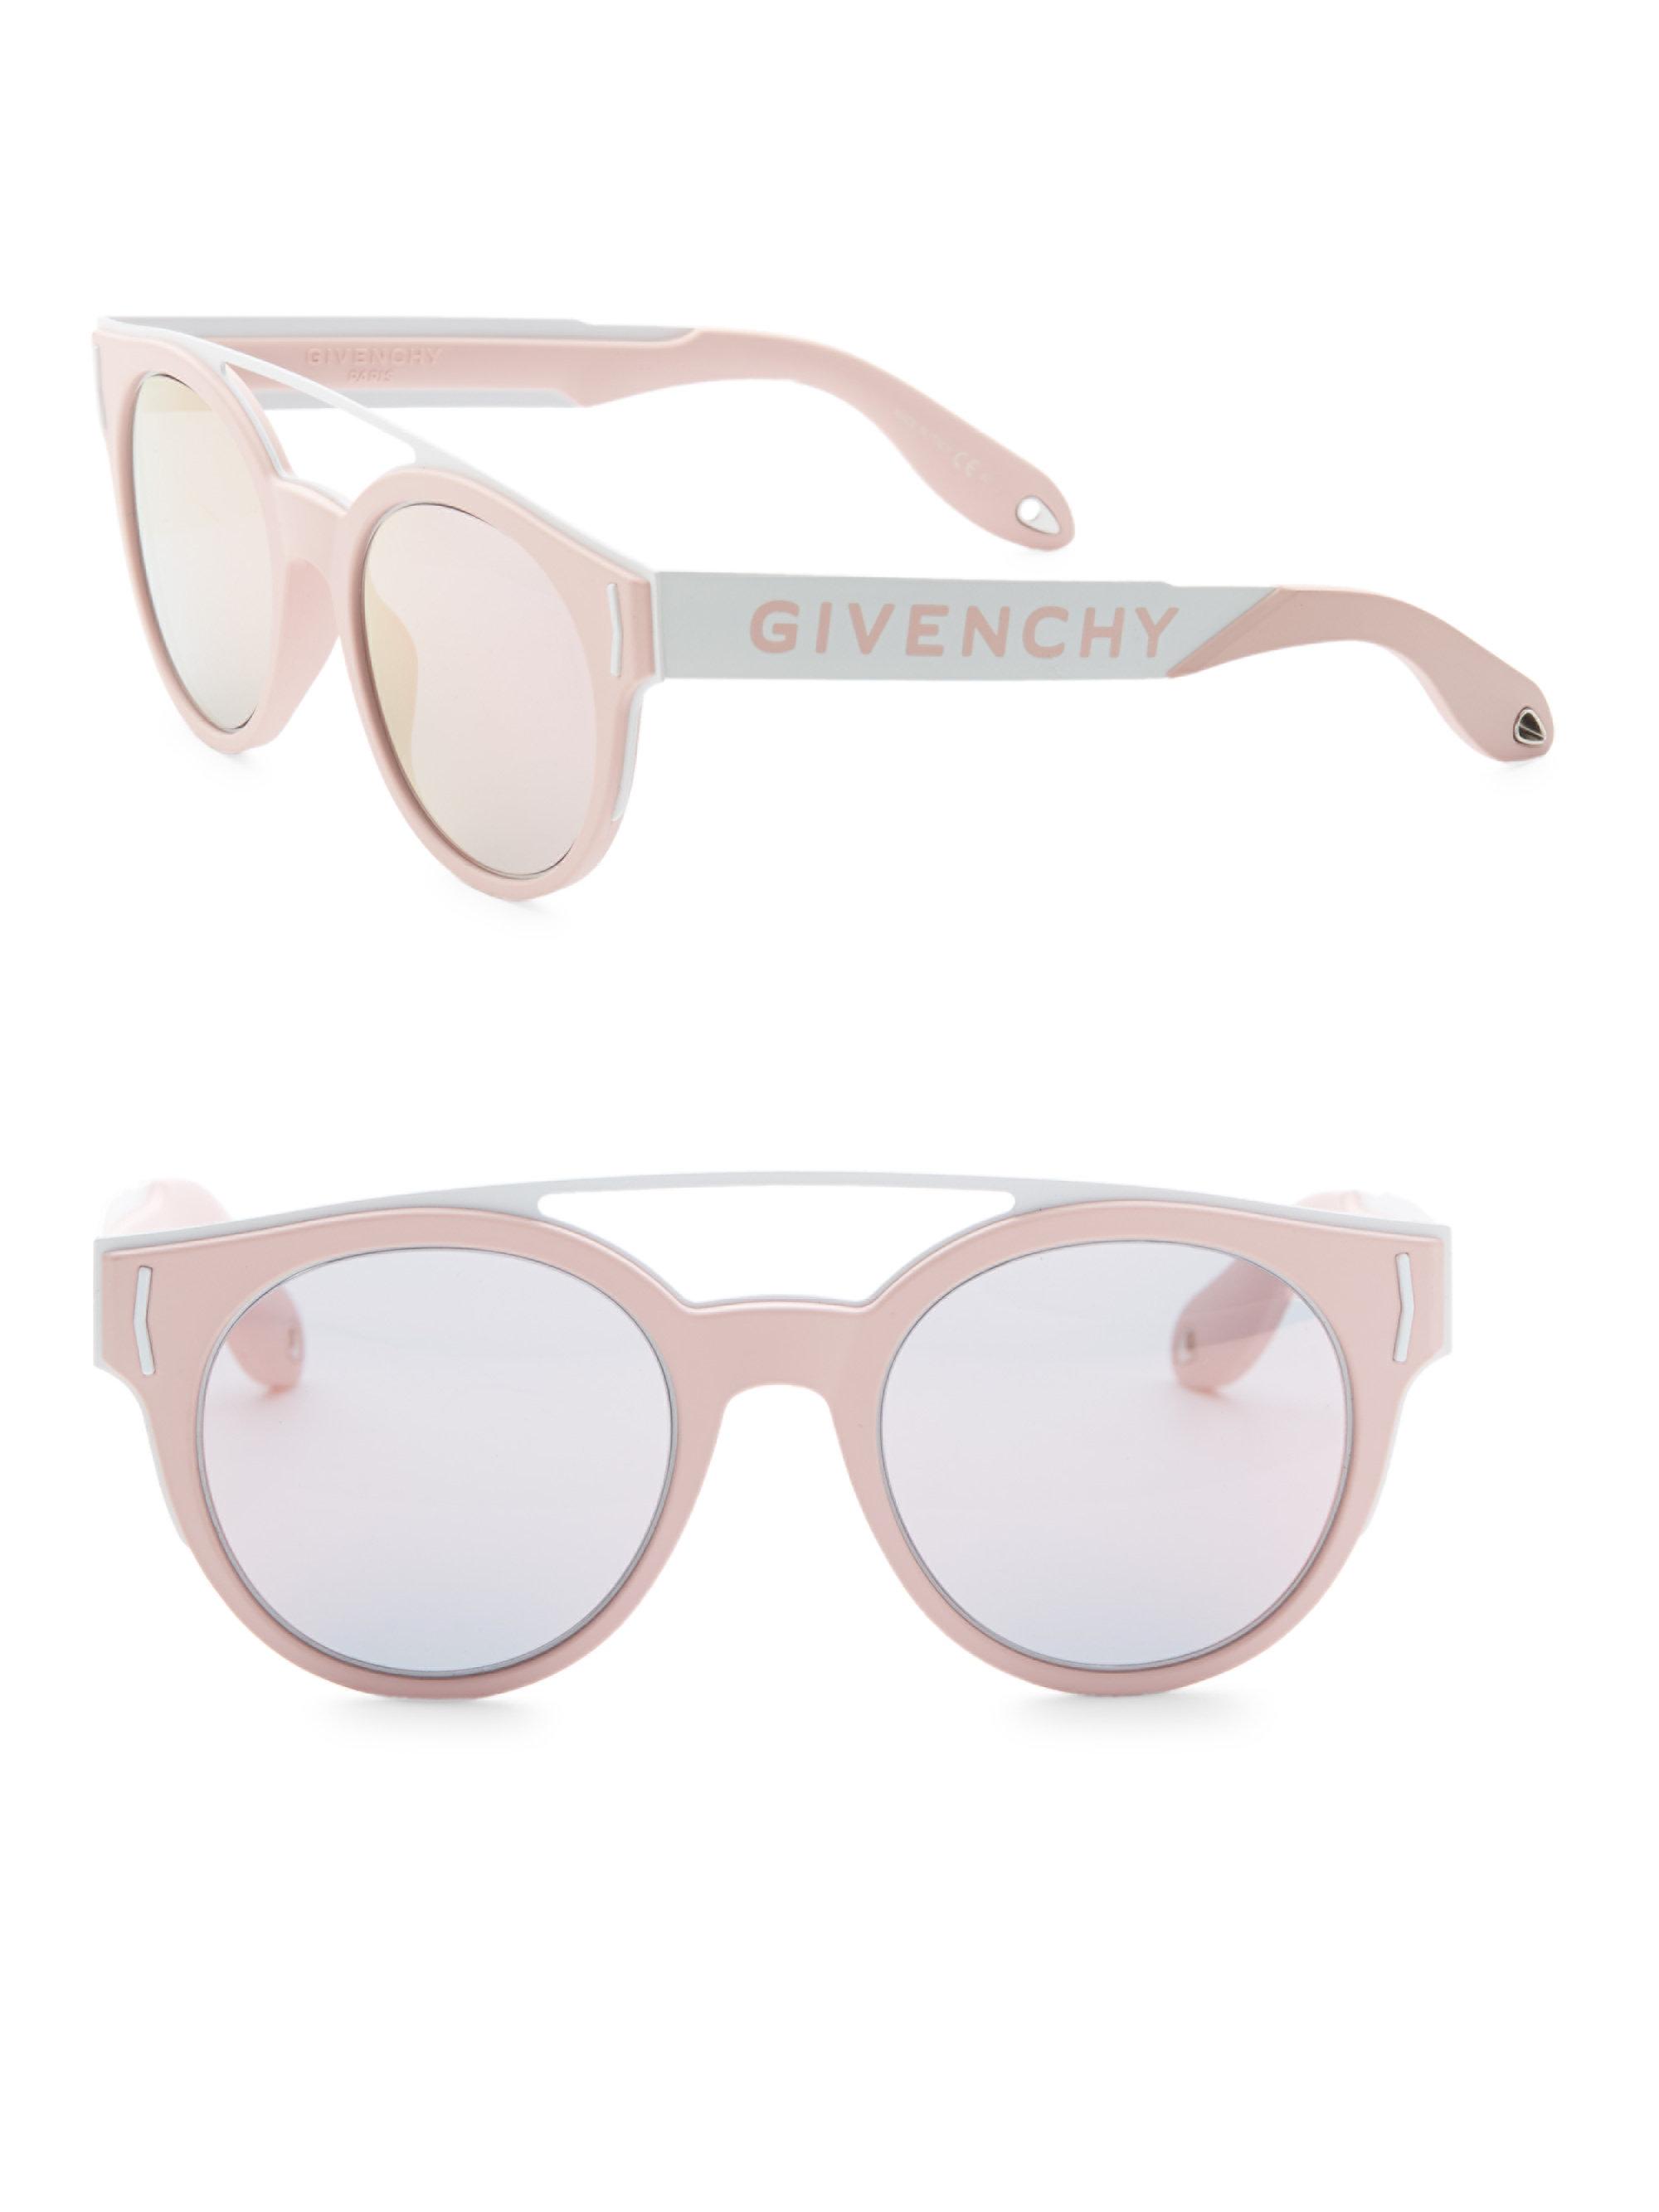 Givenchy Rubber 50mm Round Sunglasses 